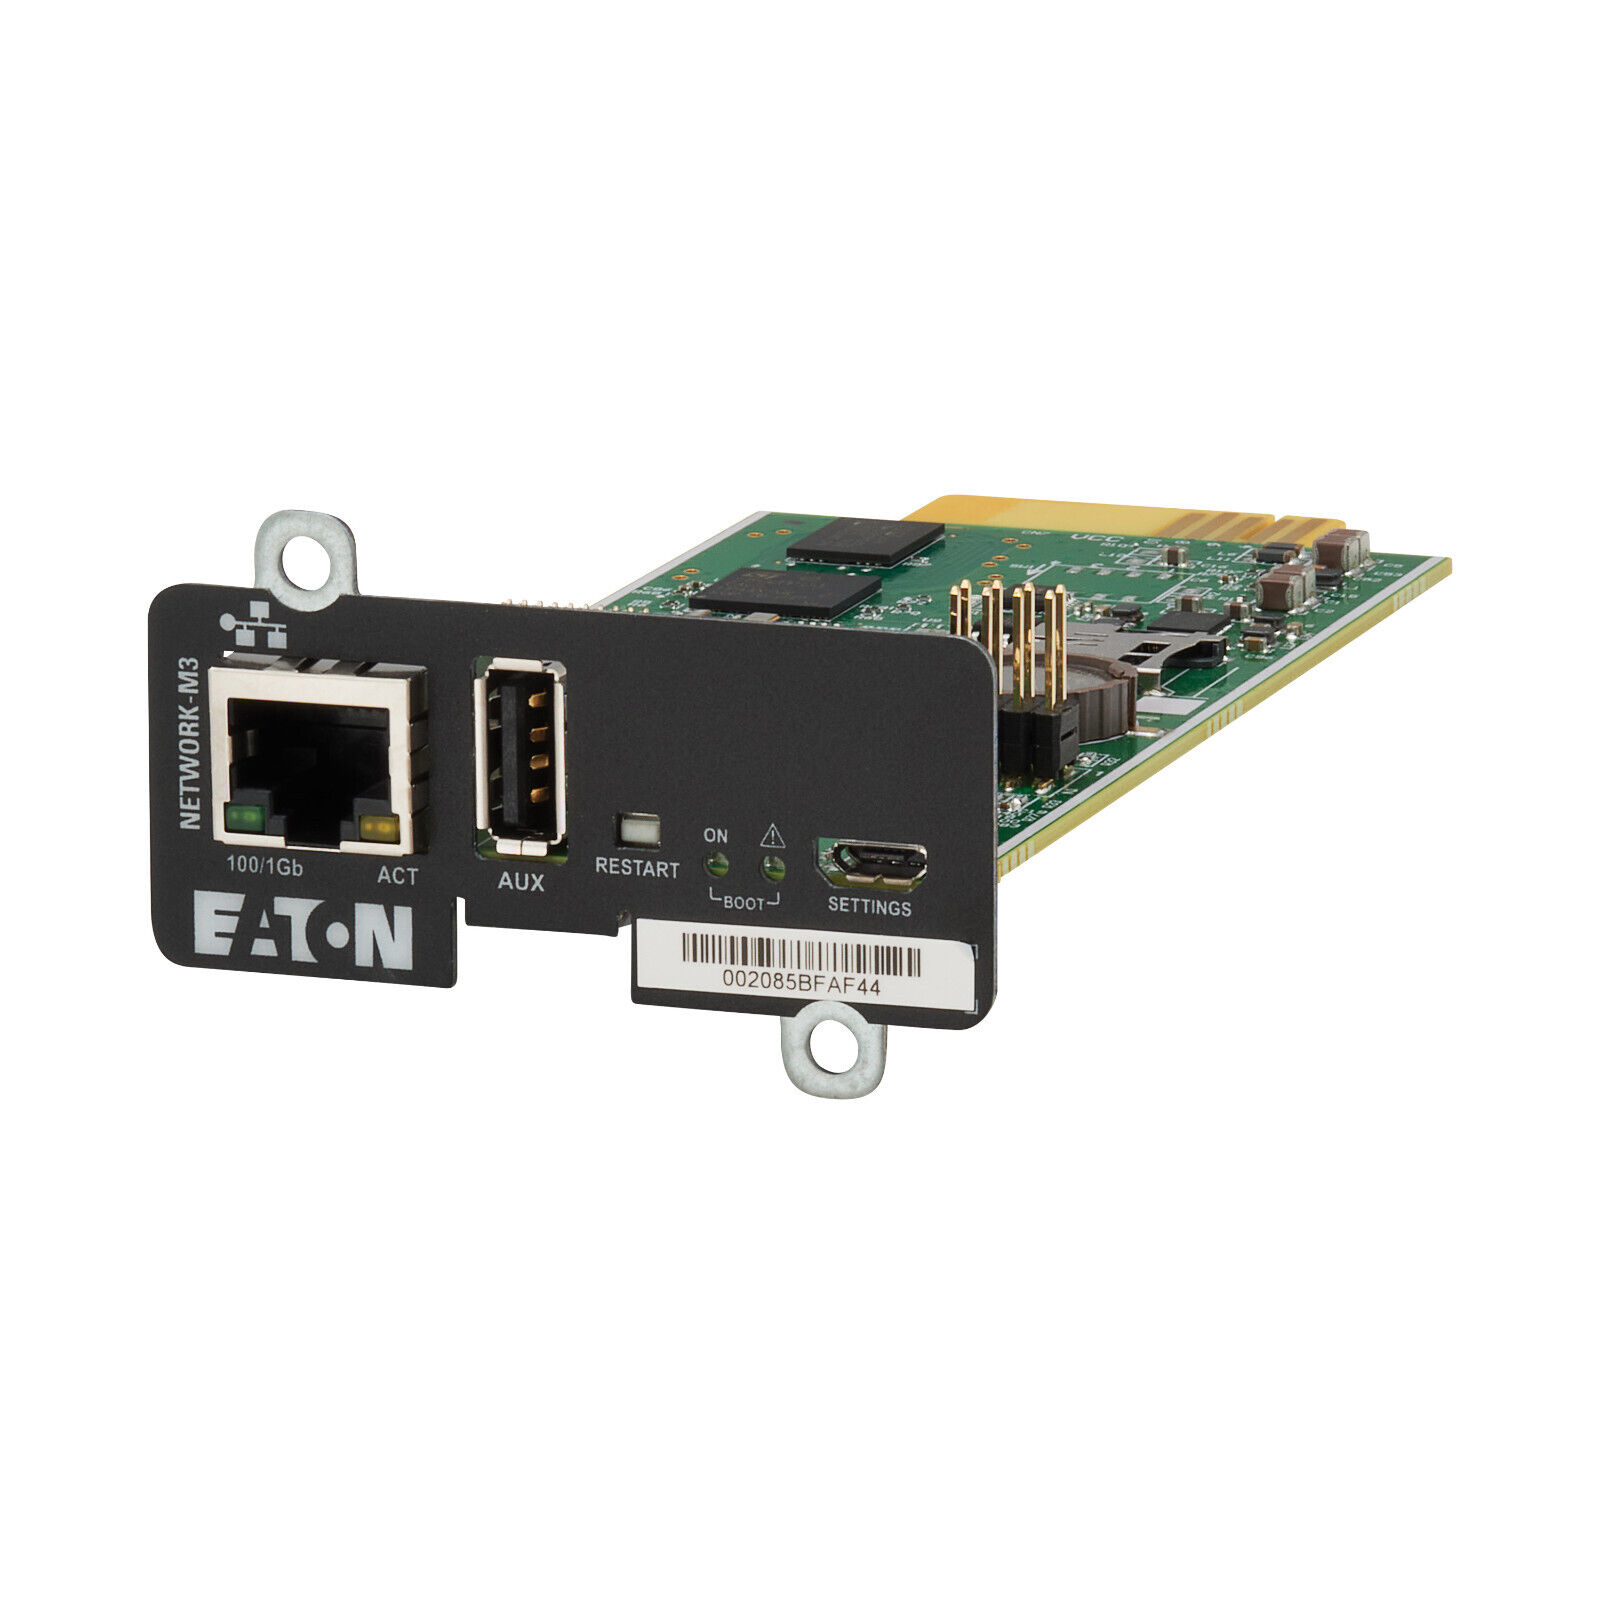 Eaton Gigabit NETWORK-M3 Card for UPS and PDU (NETWORK-M3)